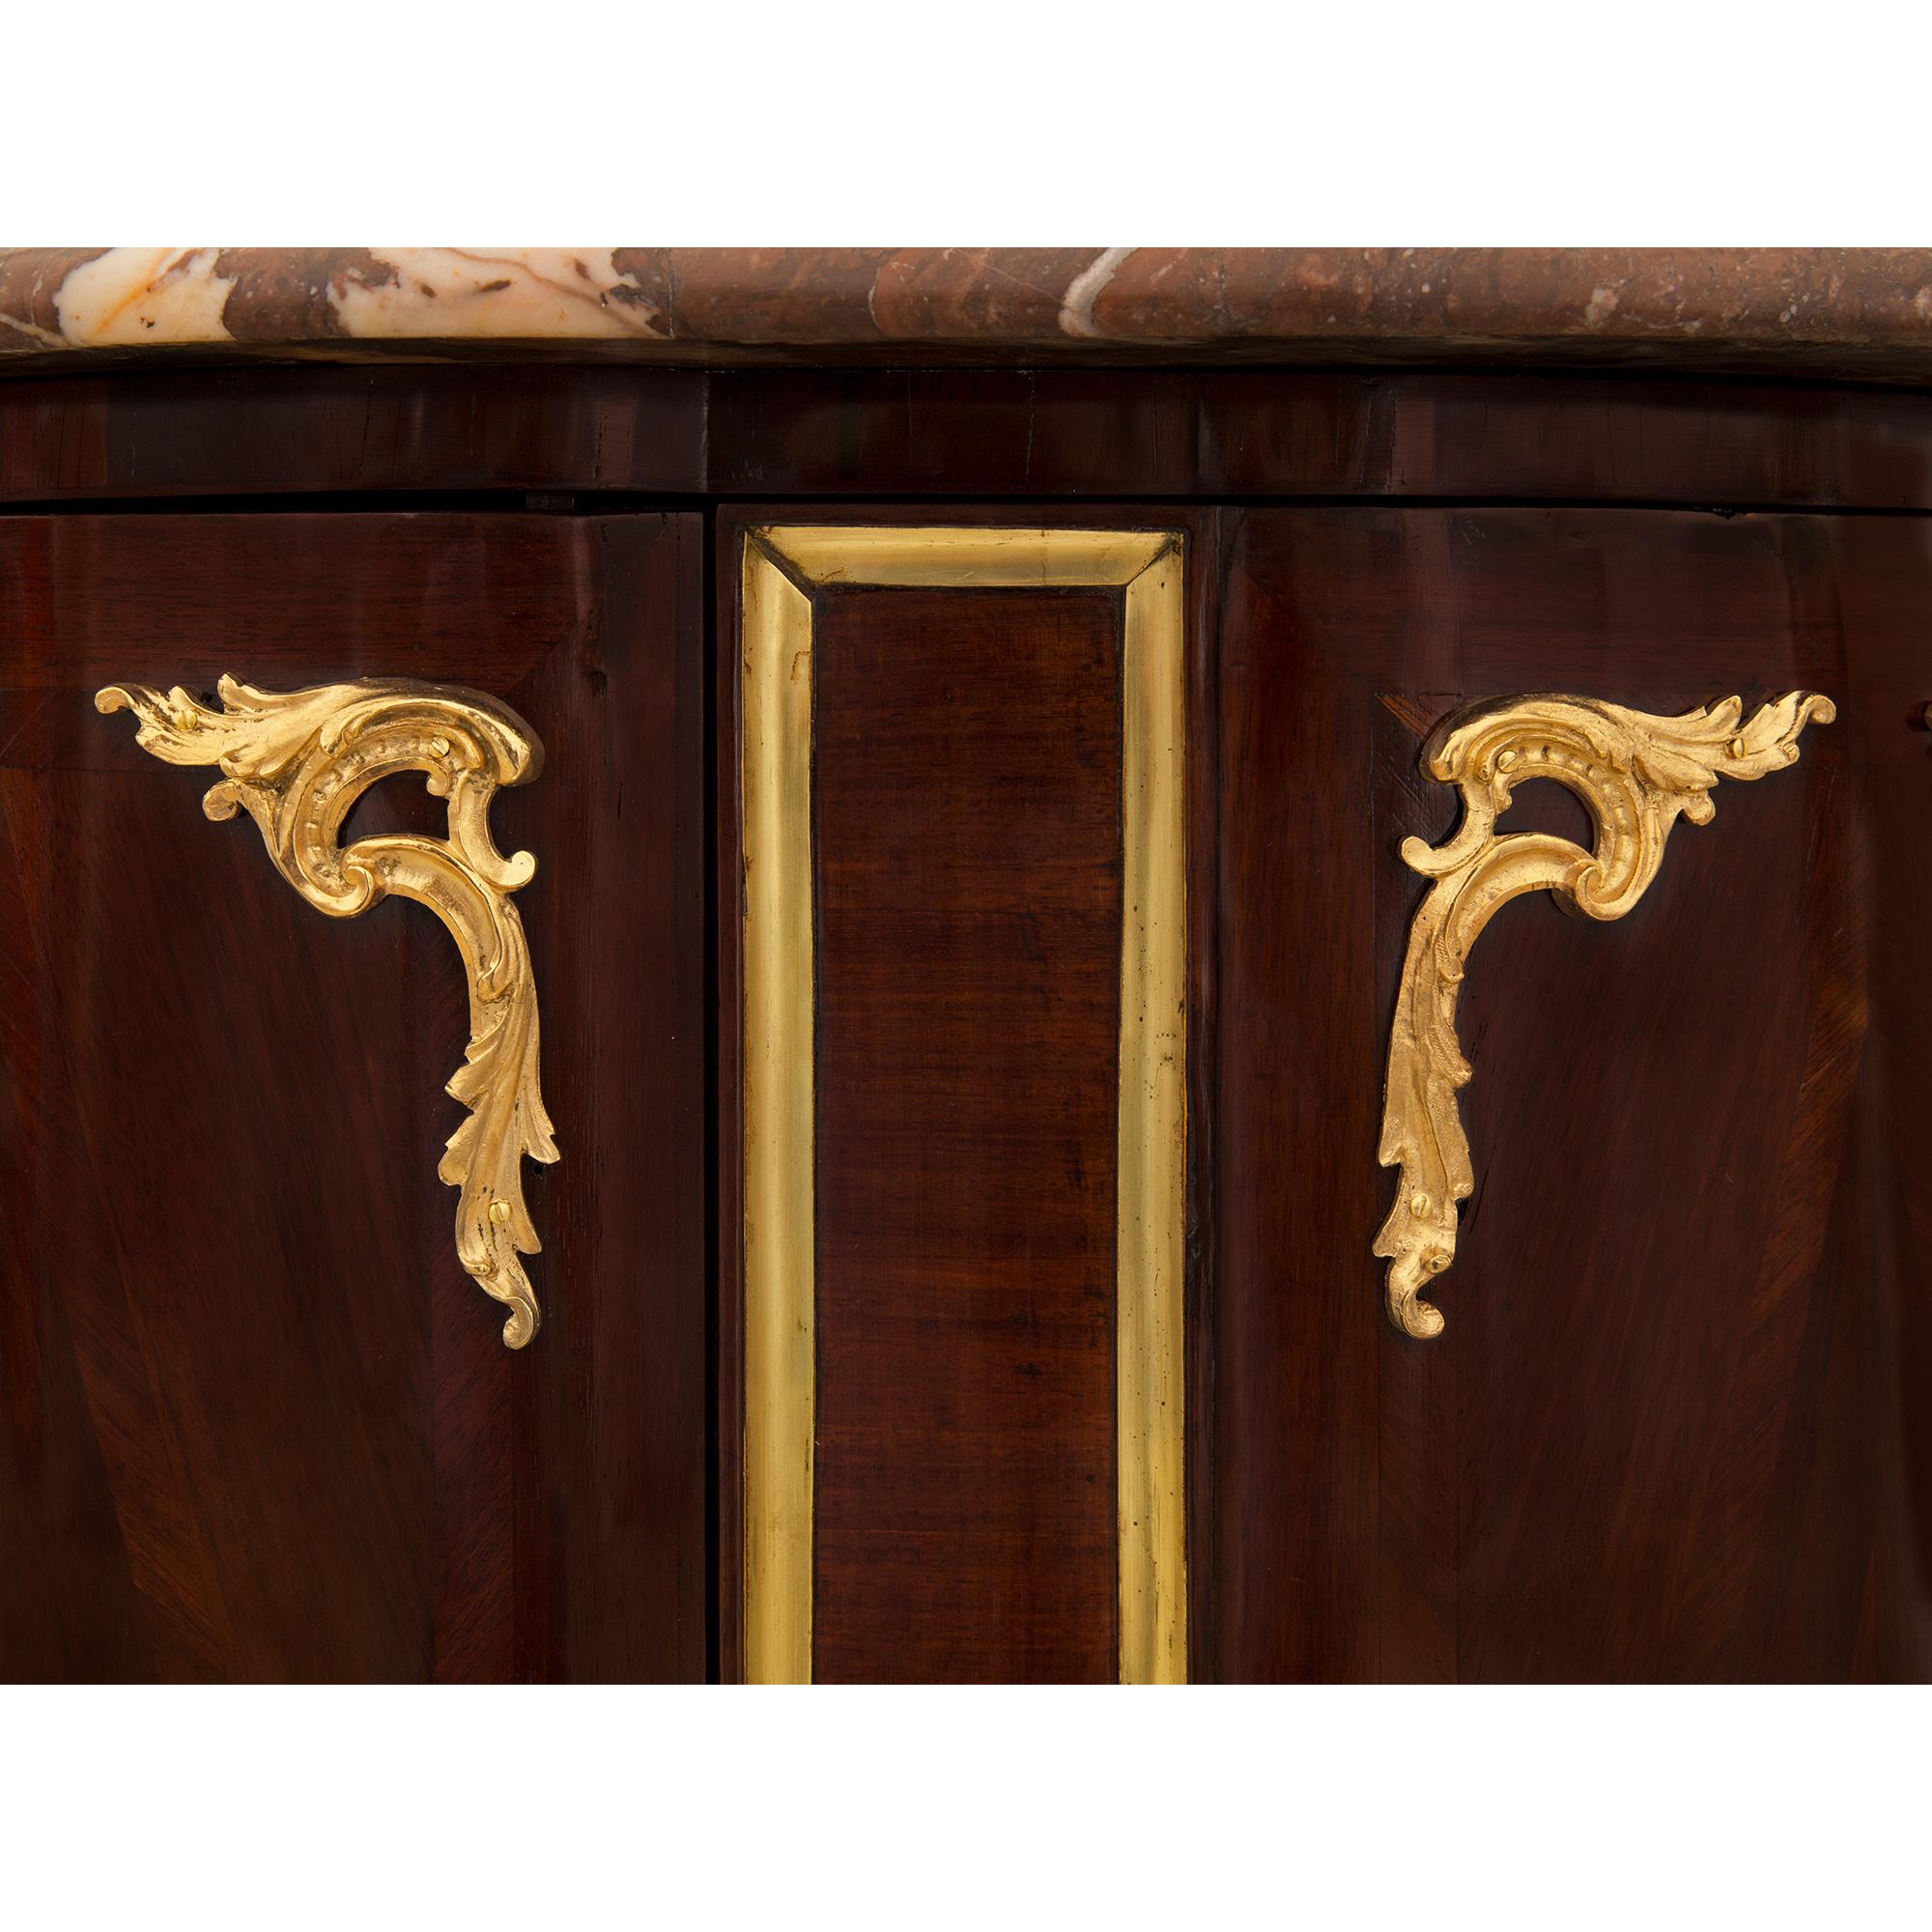 Ormolu Pair of French 18th Century Régence St. Encoignure Corner Cabinets For Sale